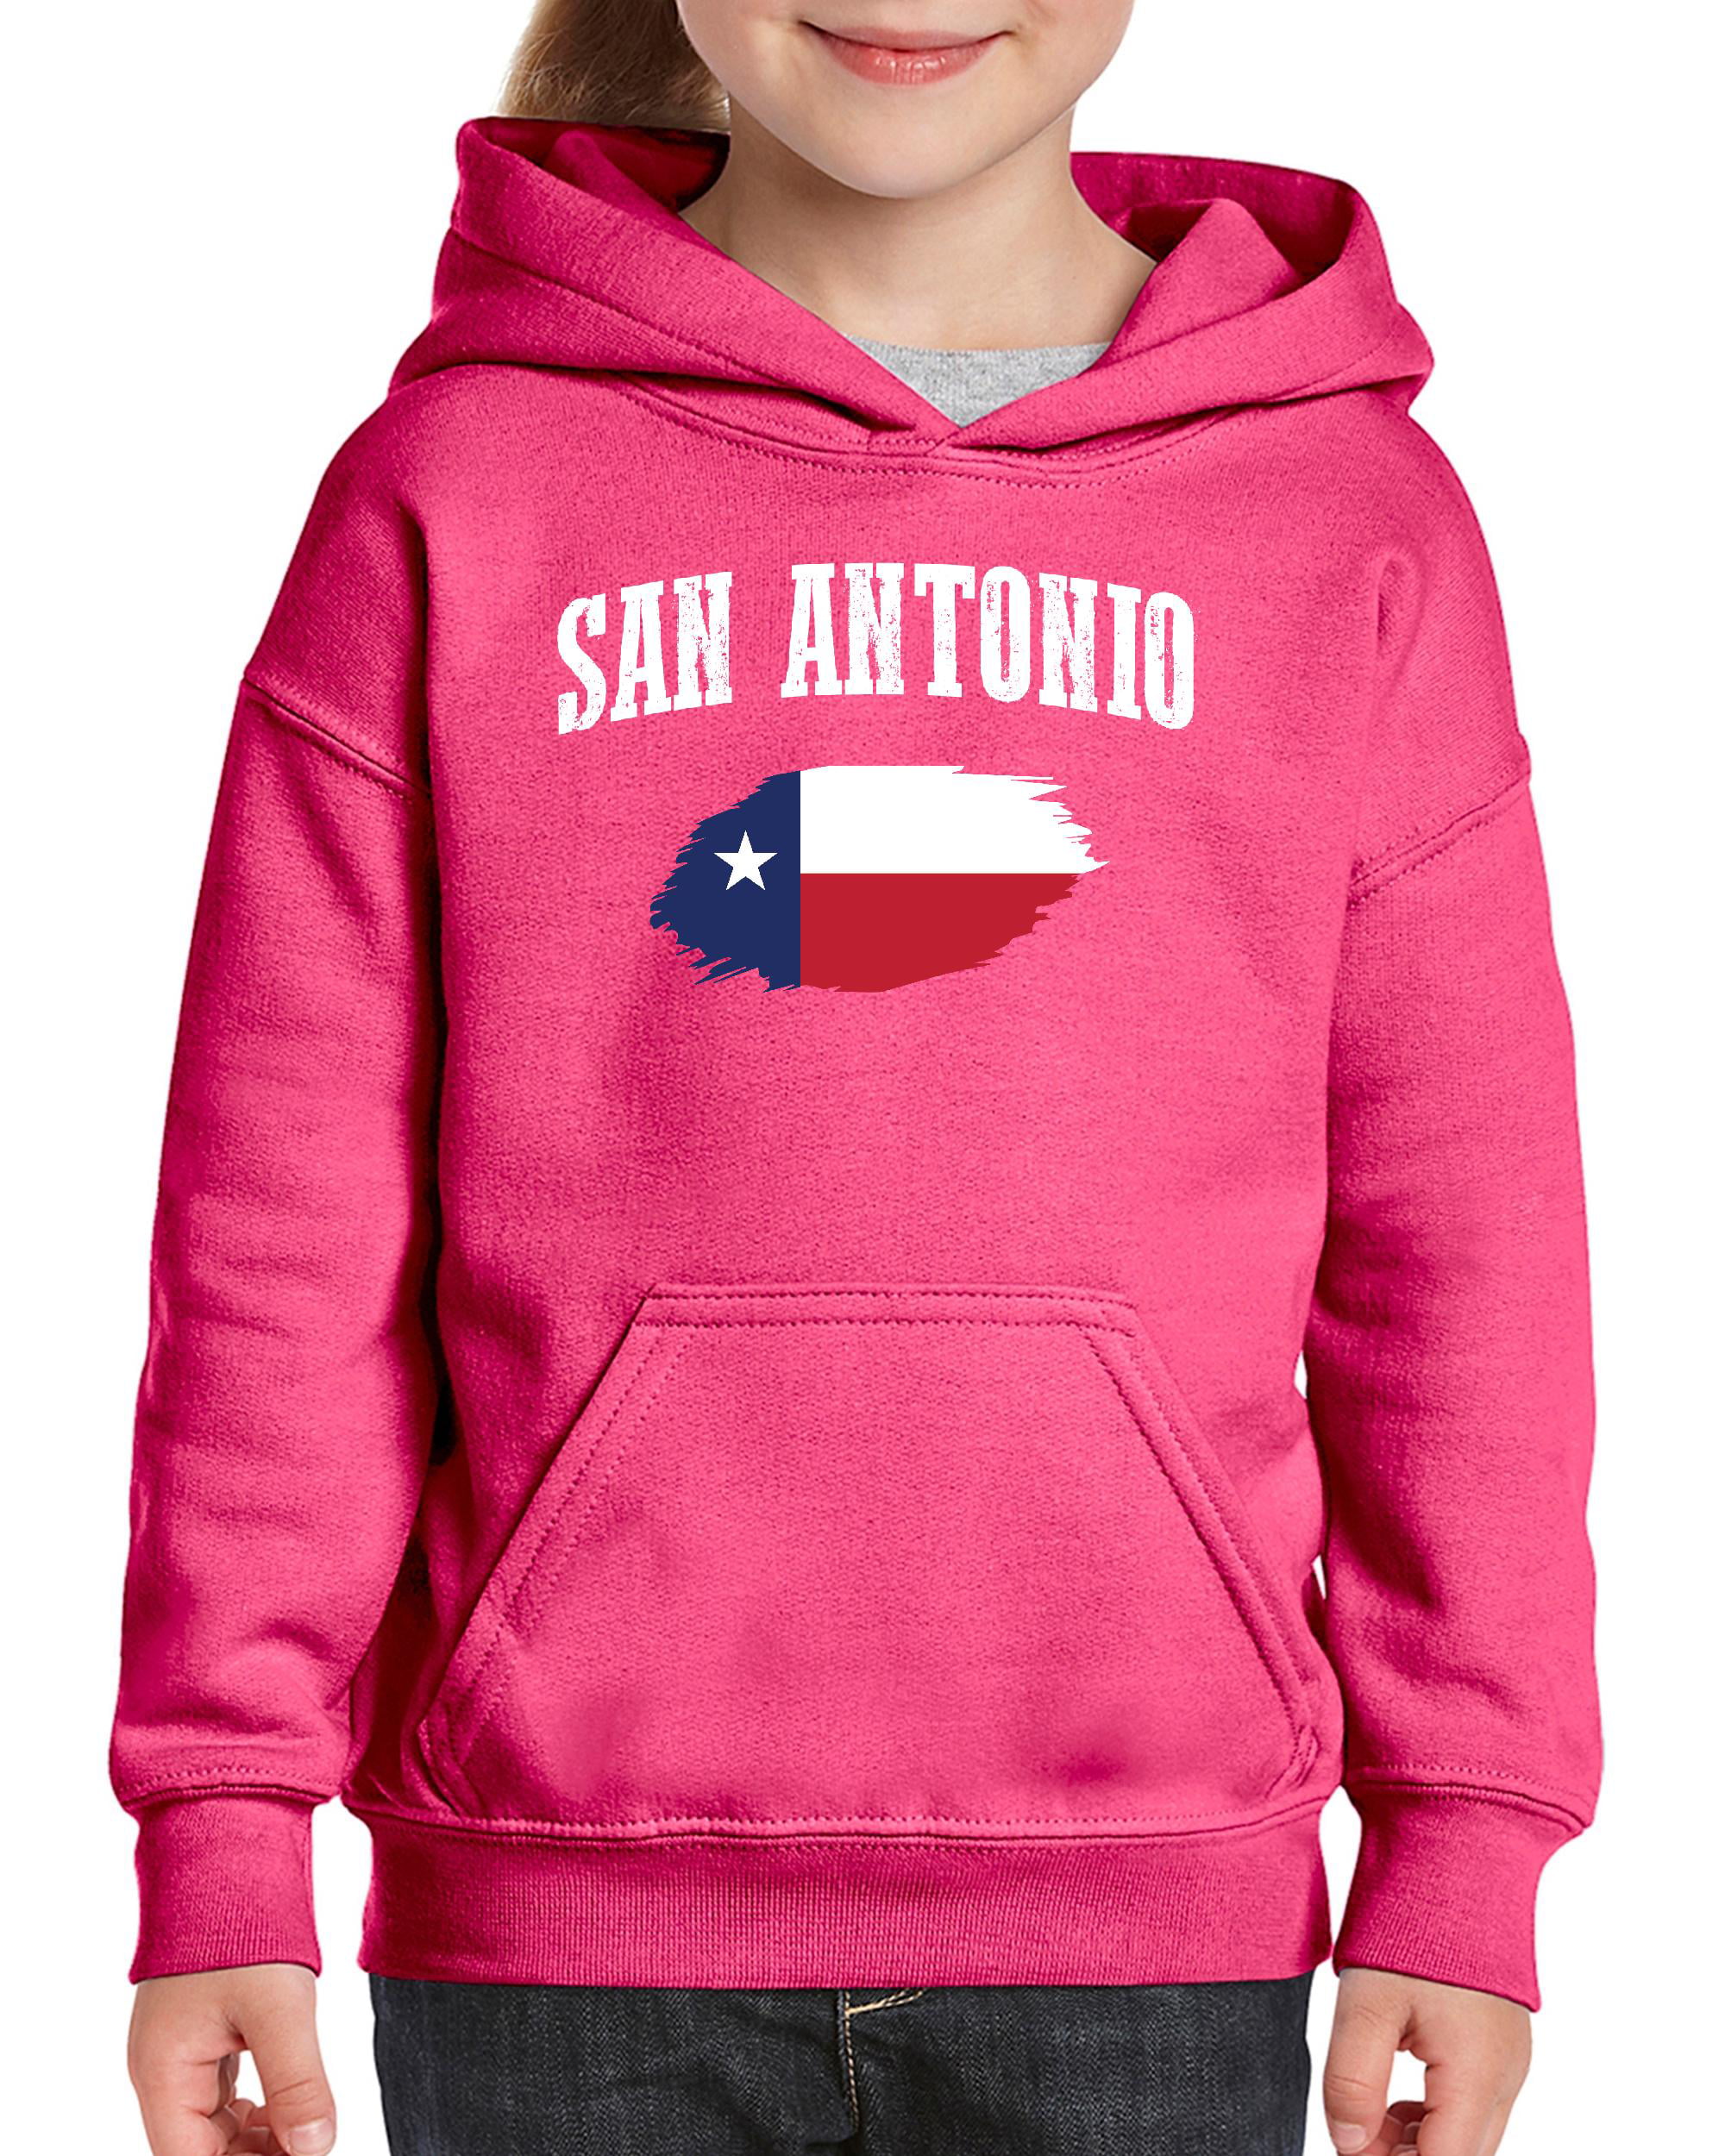 Puerto Rico Map Flag and Text Teen Boys Girls 3D Print Pullover Hoodies with Pocket Hooded Sweatshirt